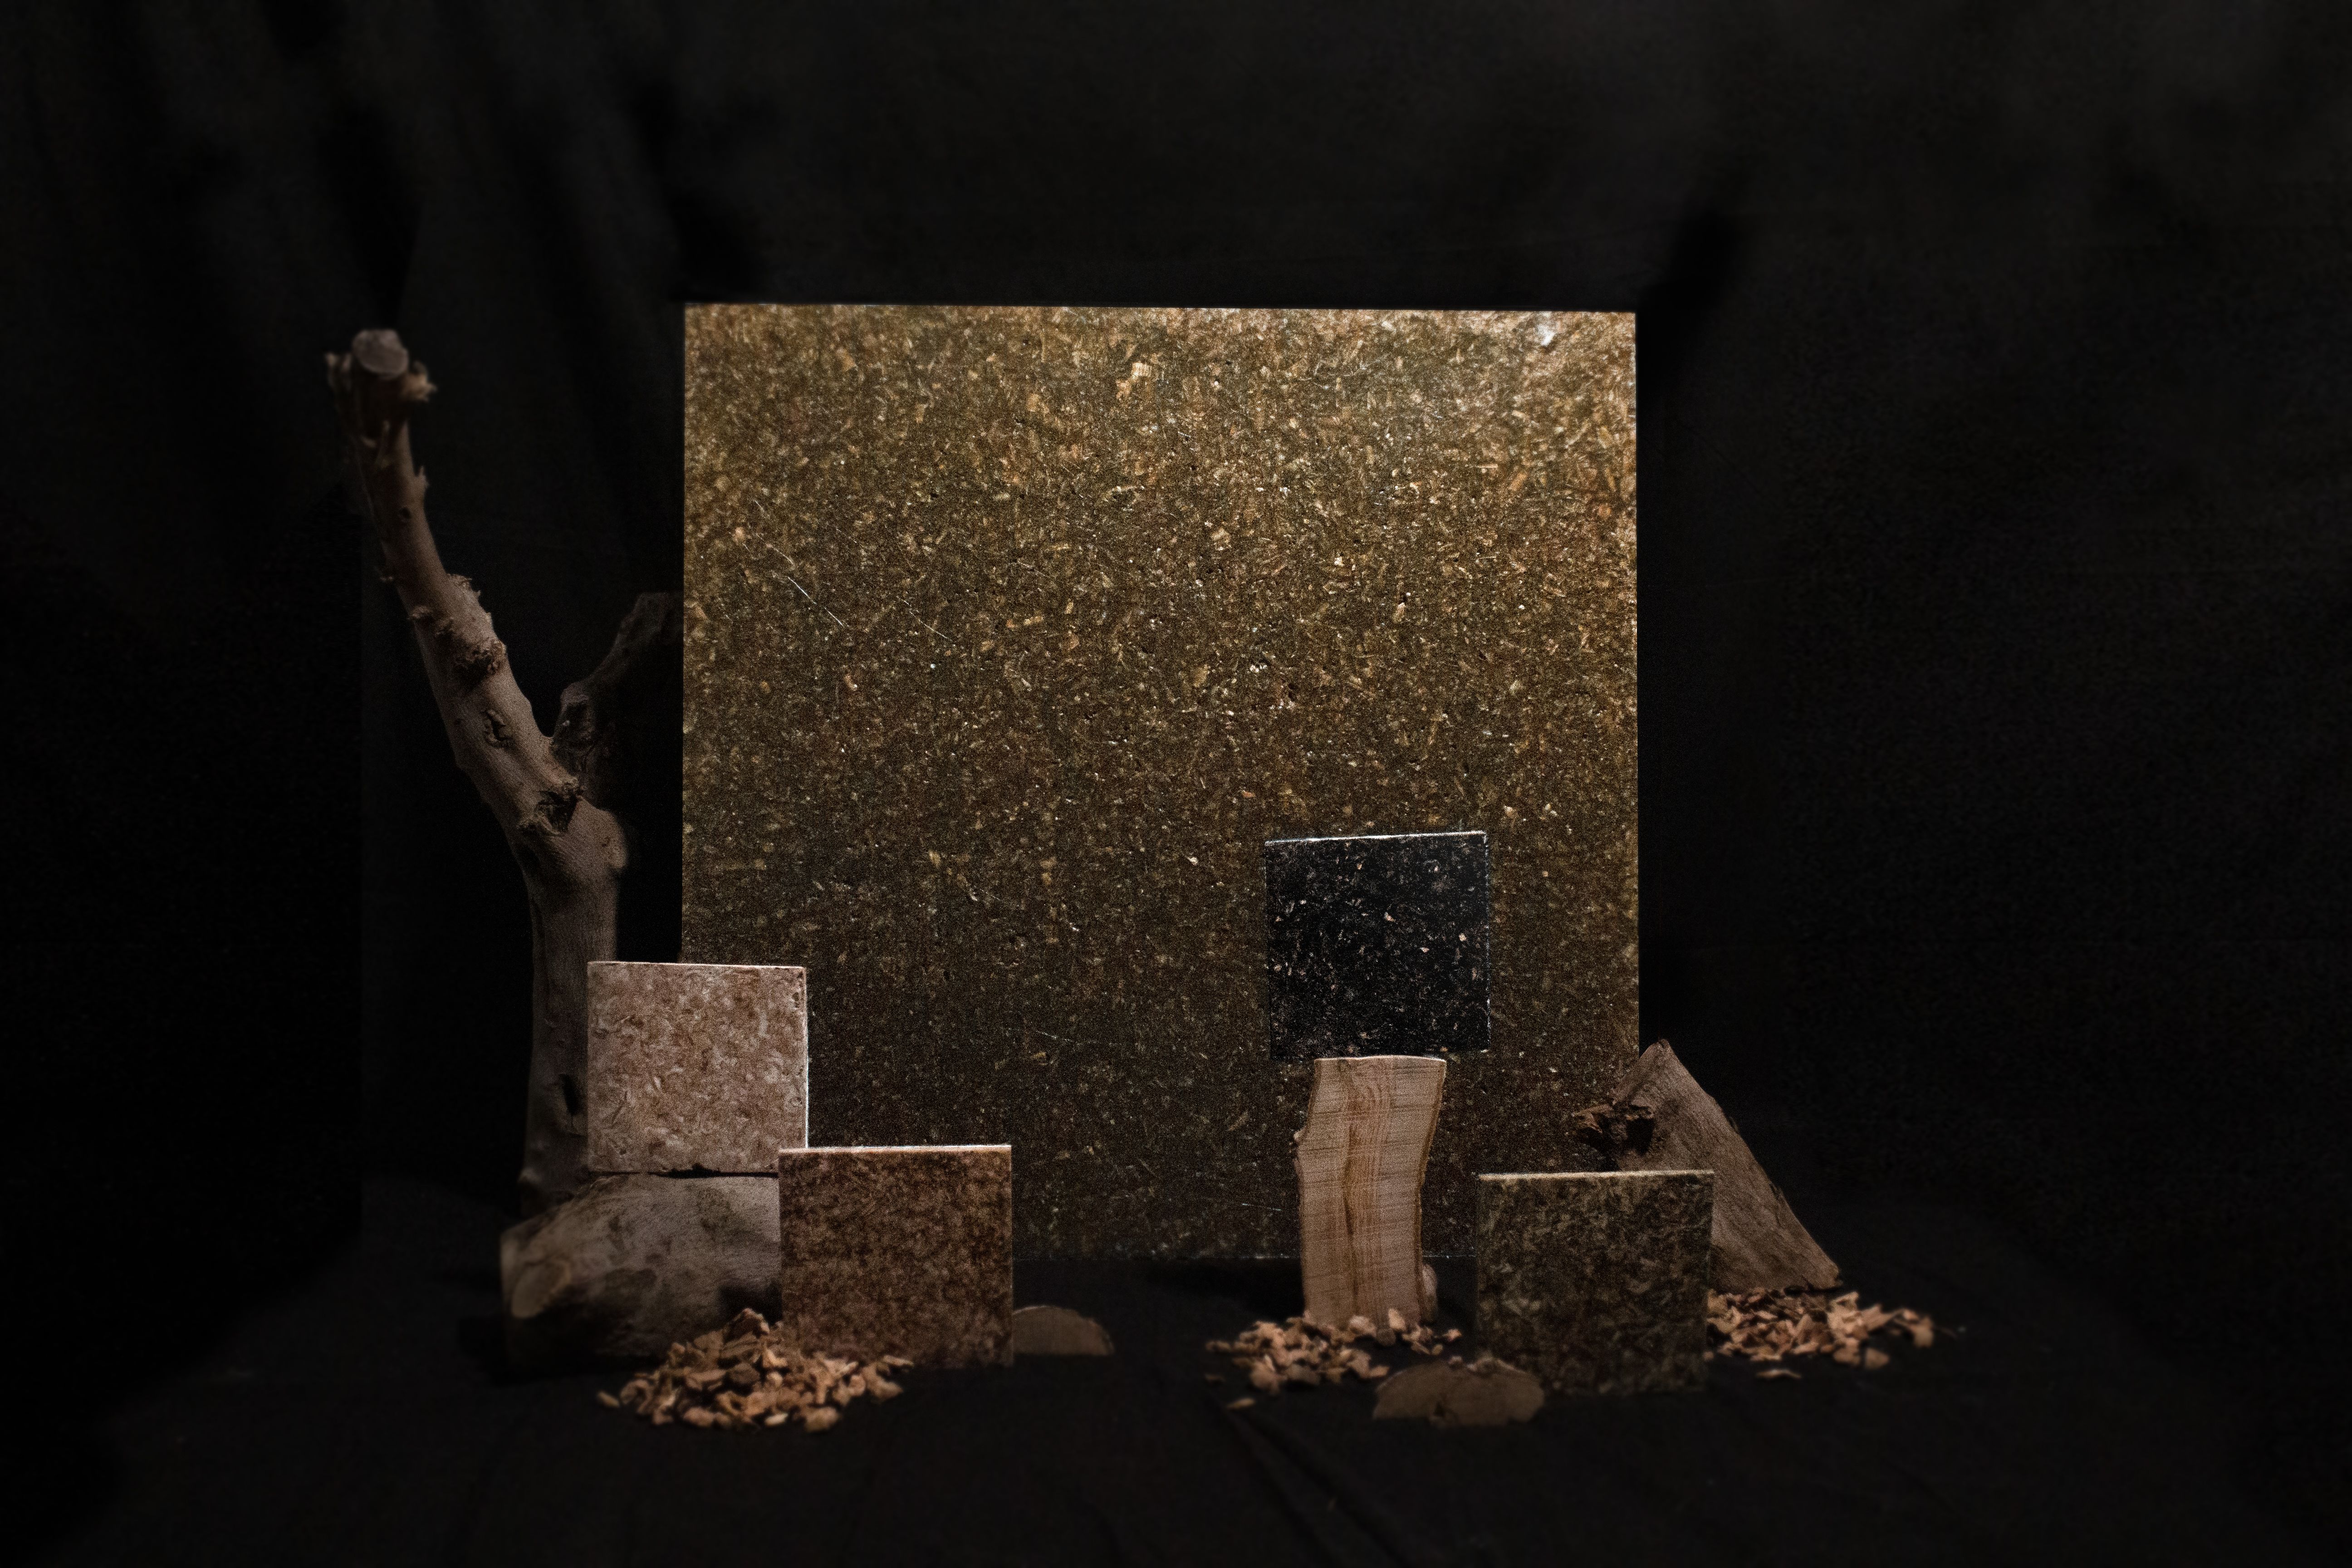 Chopped wood blocks and squares of cork arranged next to a tree again a black background